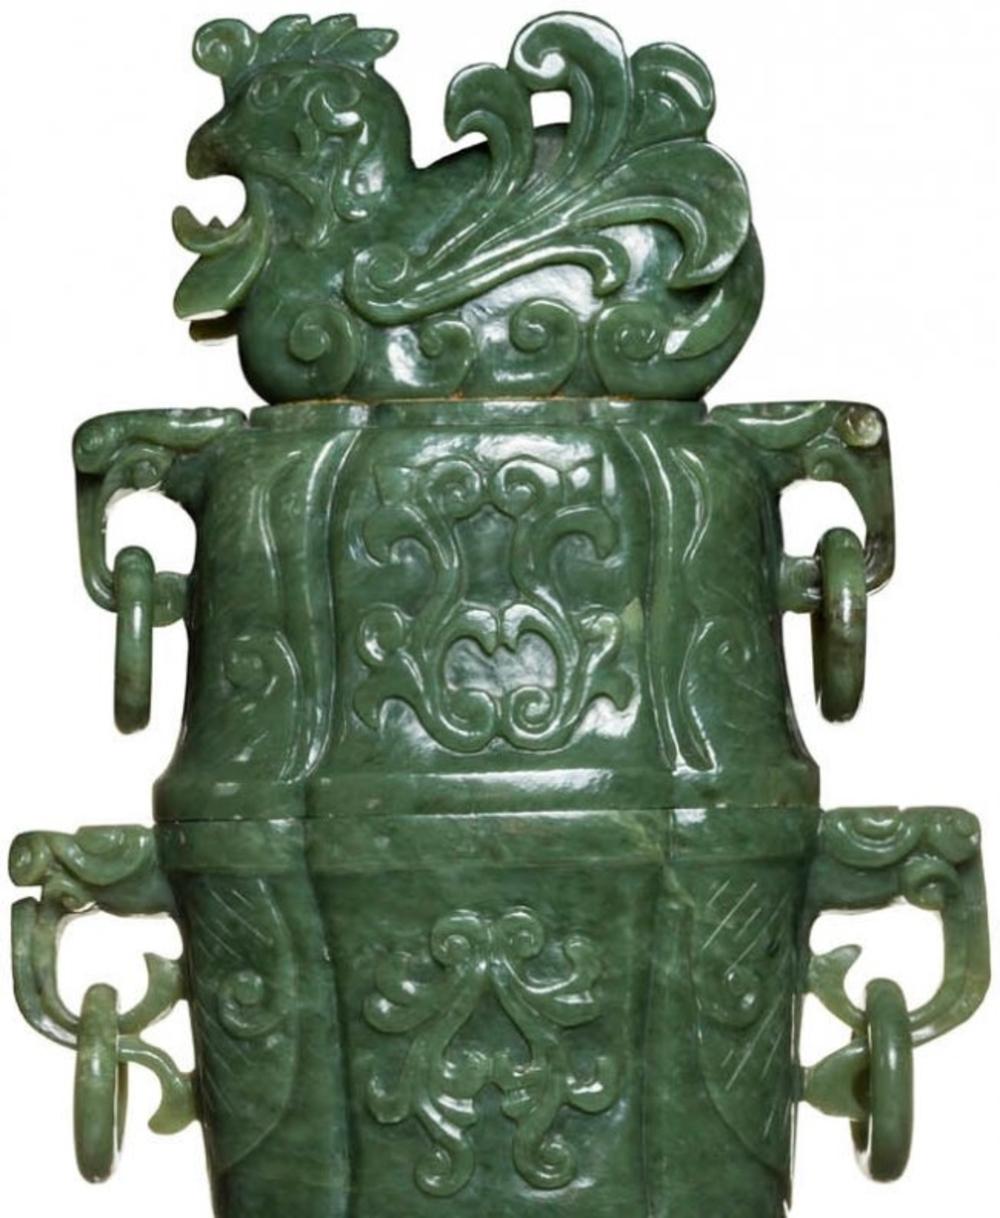 Very large Chinese carved jade vases and covers
Each carved in relief with scroll detail, flanked by mask
Handles supporting loose rings, the conforming cover flanked by loose rings and surmounted by a bird finial.
Measures: Height 28 in. (71.12